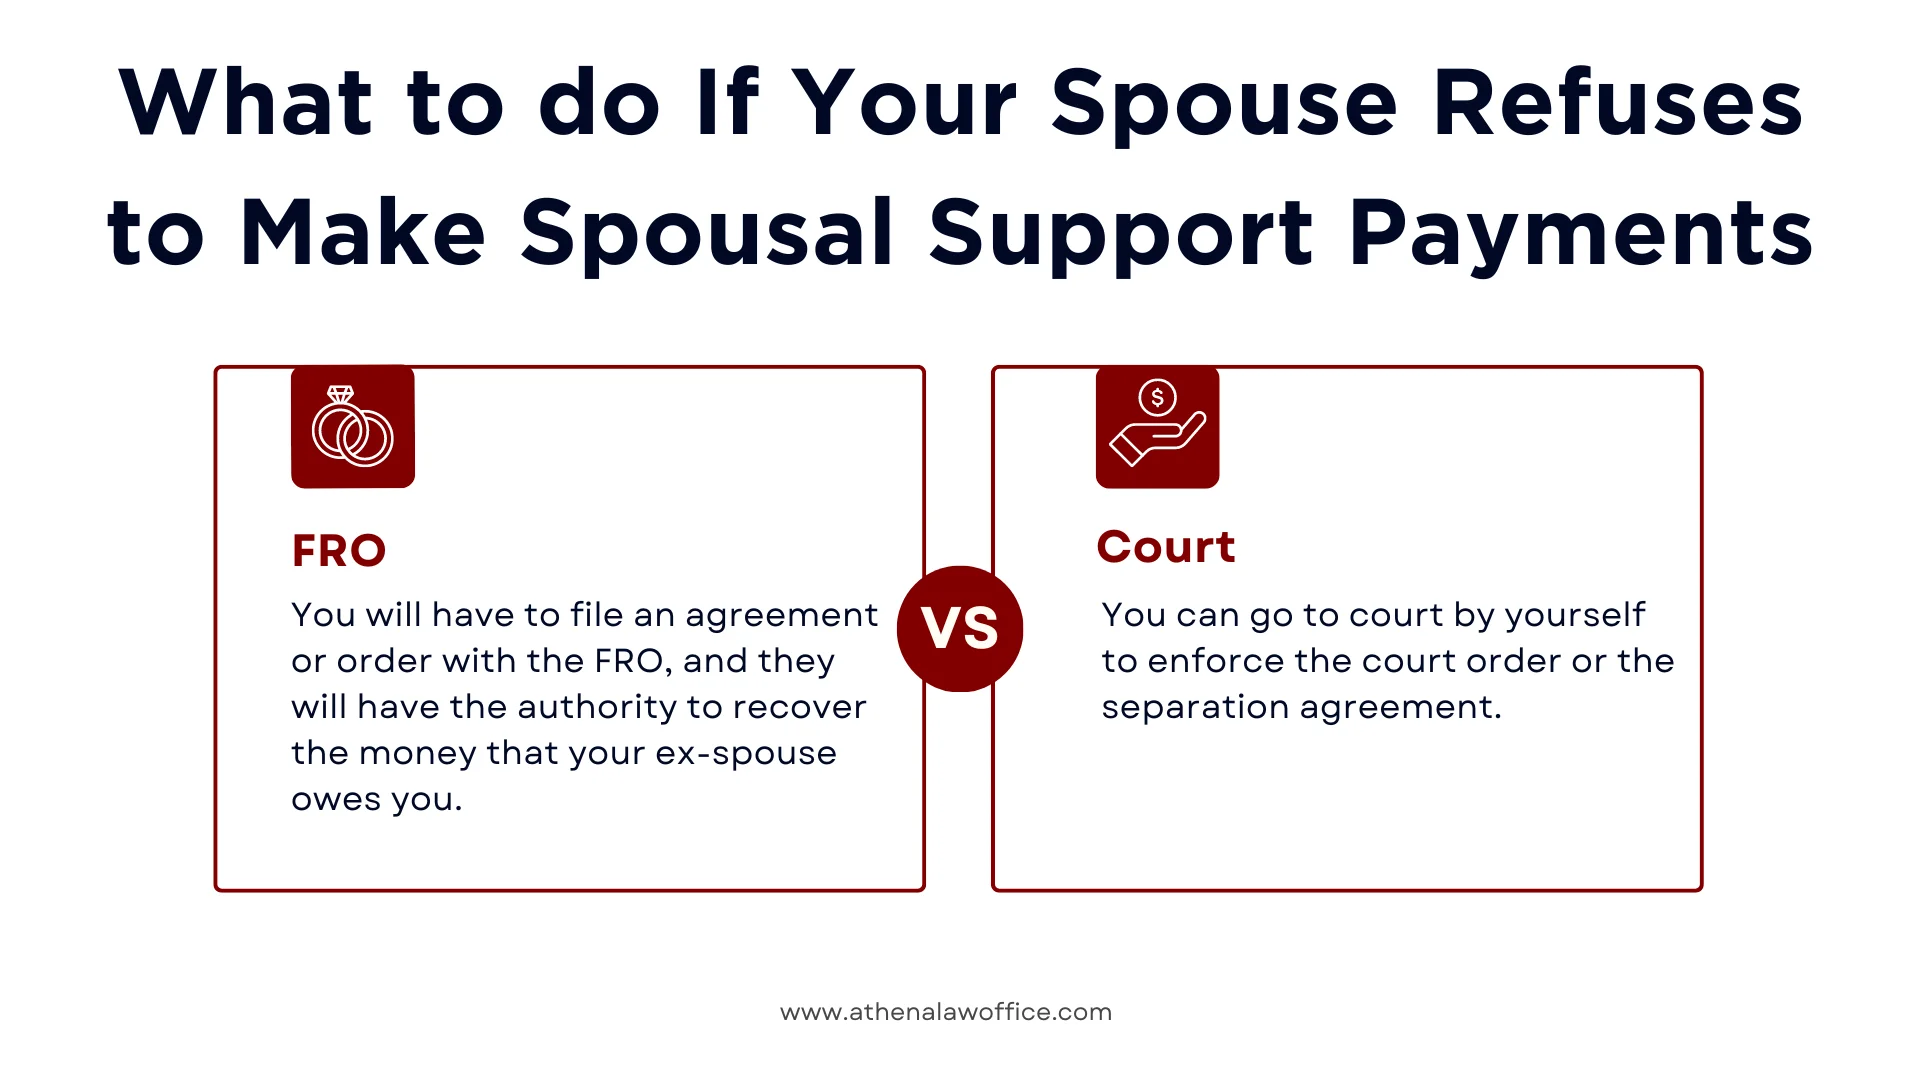 An infographic on what to do when spouse refuses to make spousal support payments 